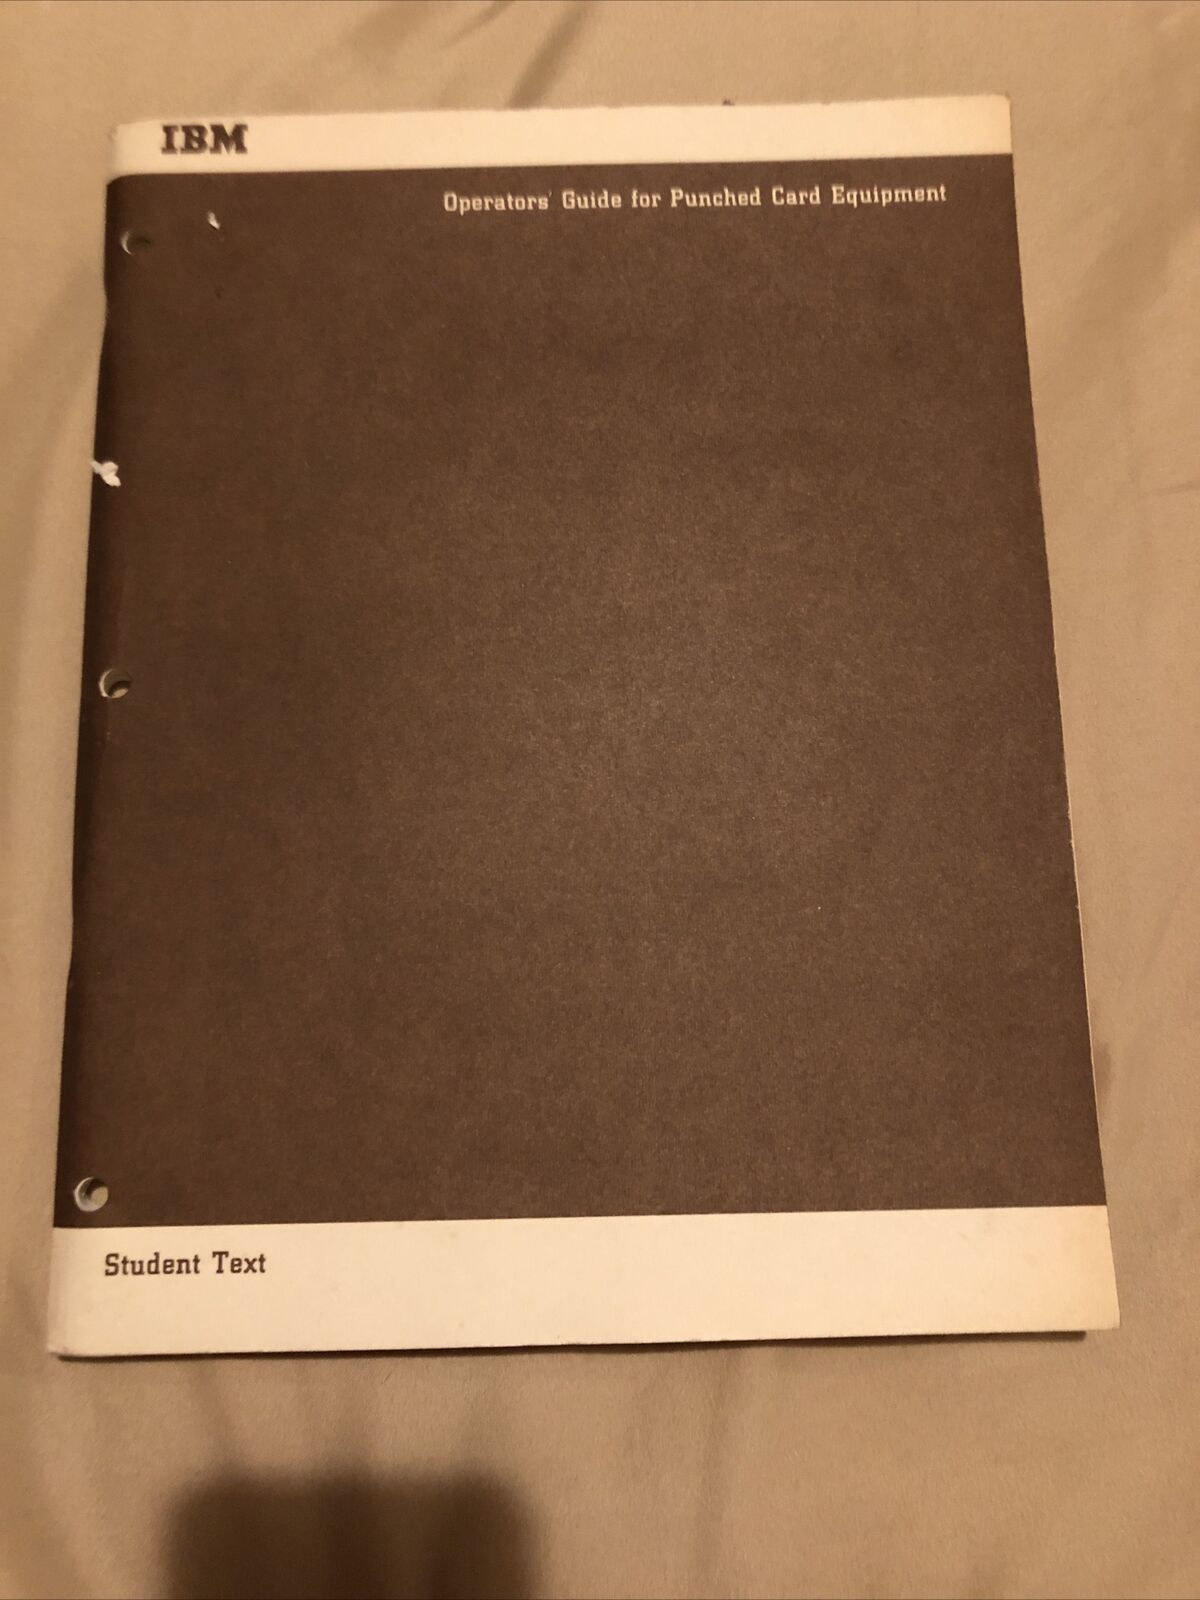 IBM Operators Guide For Punched Card Equipment March 1968 Vintage